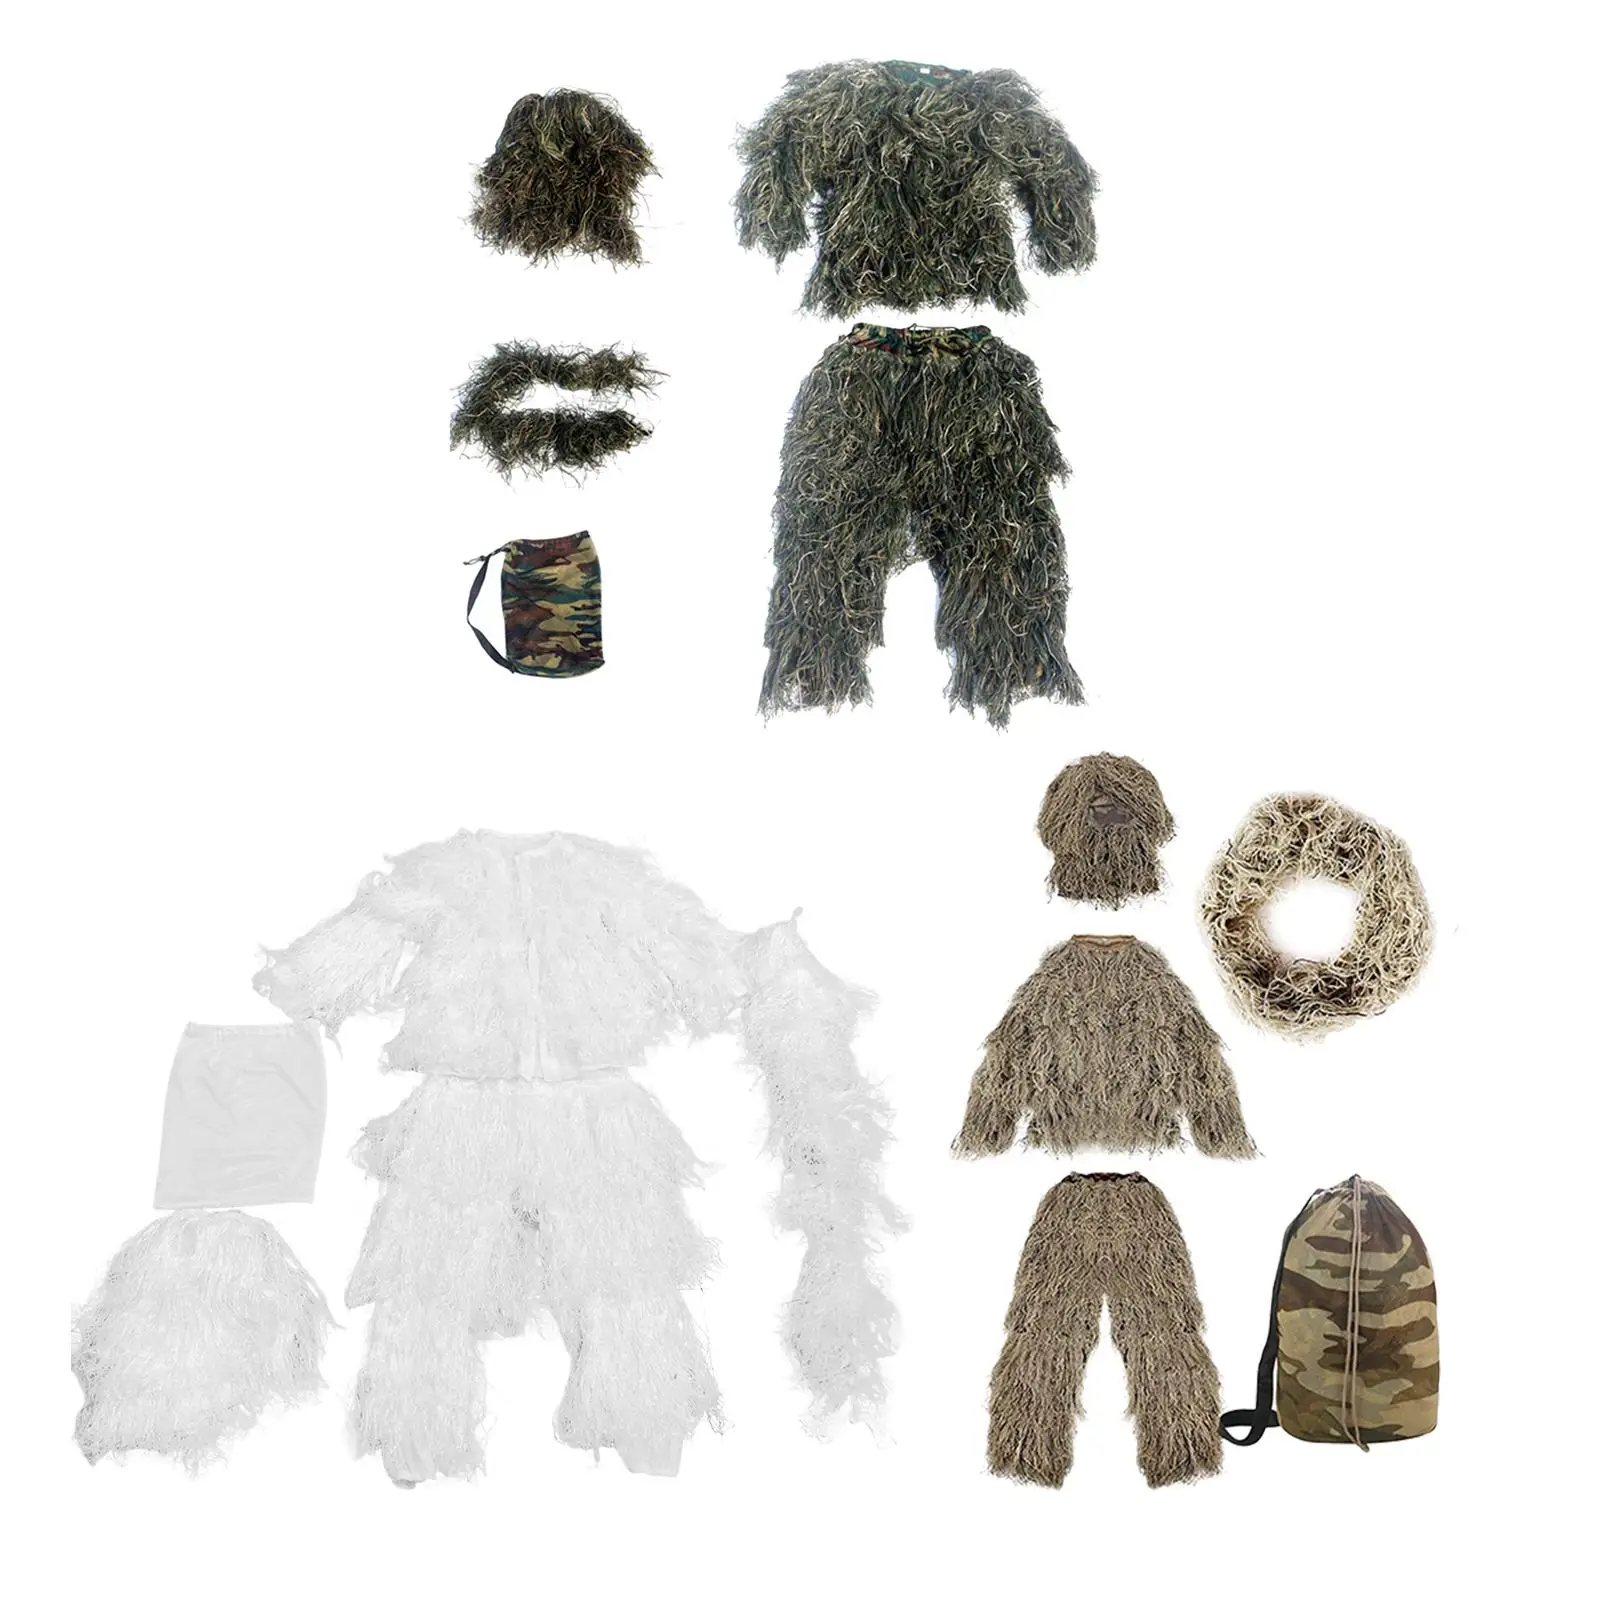 Ghillie Suit for Men Breathable Jacket Uniform Set for Party Costume Hunting